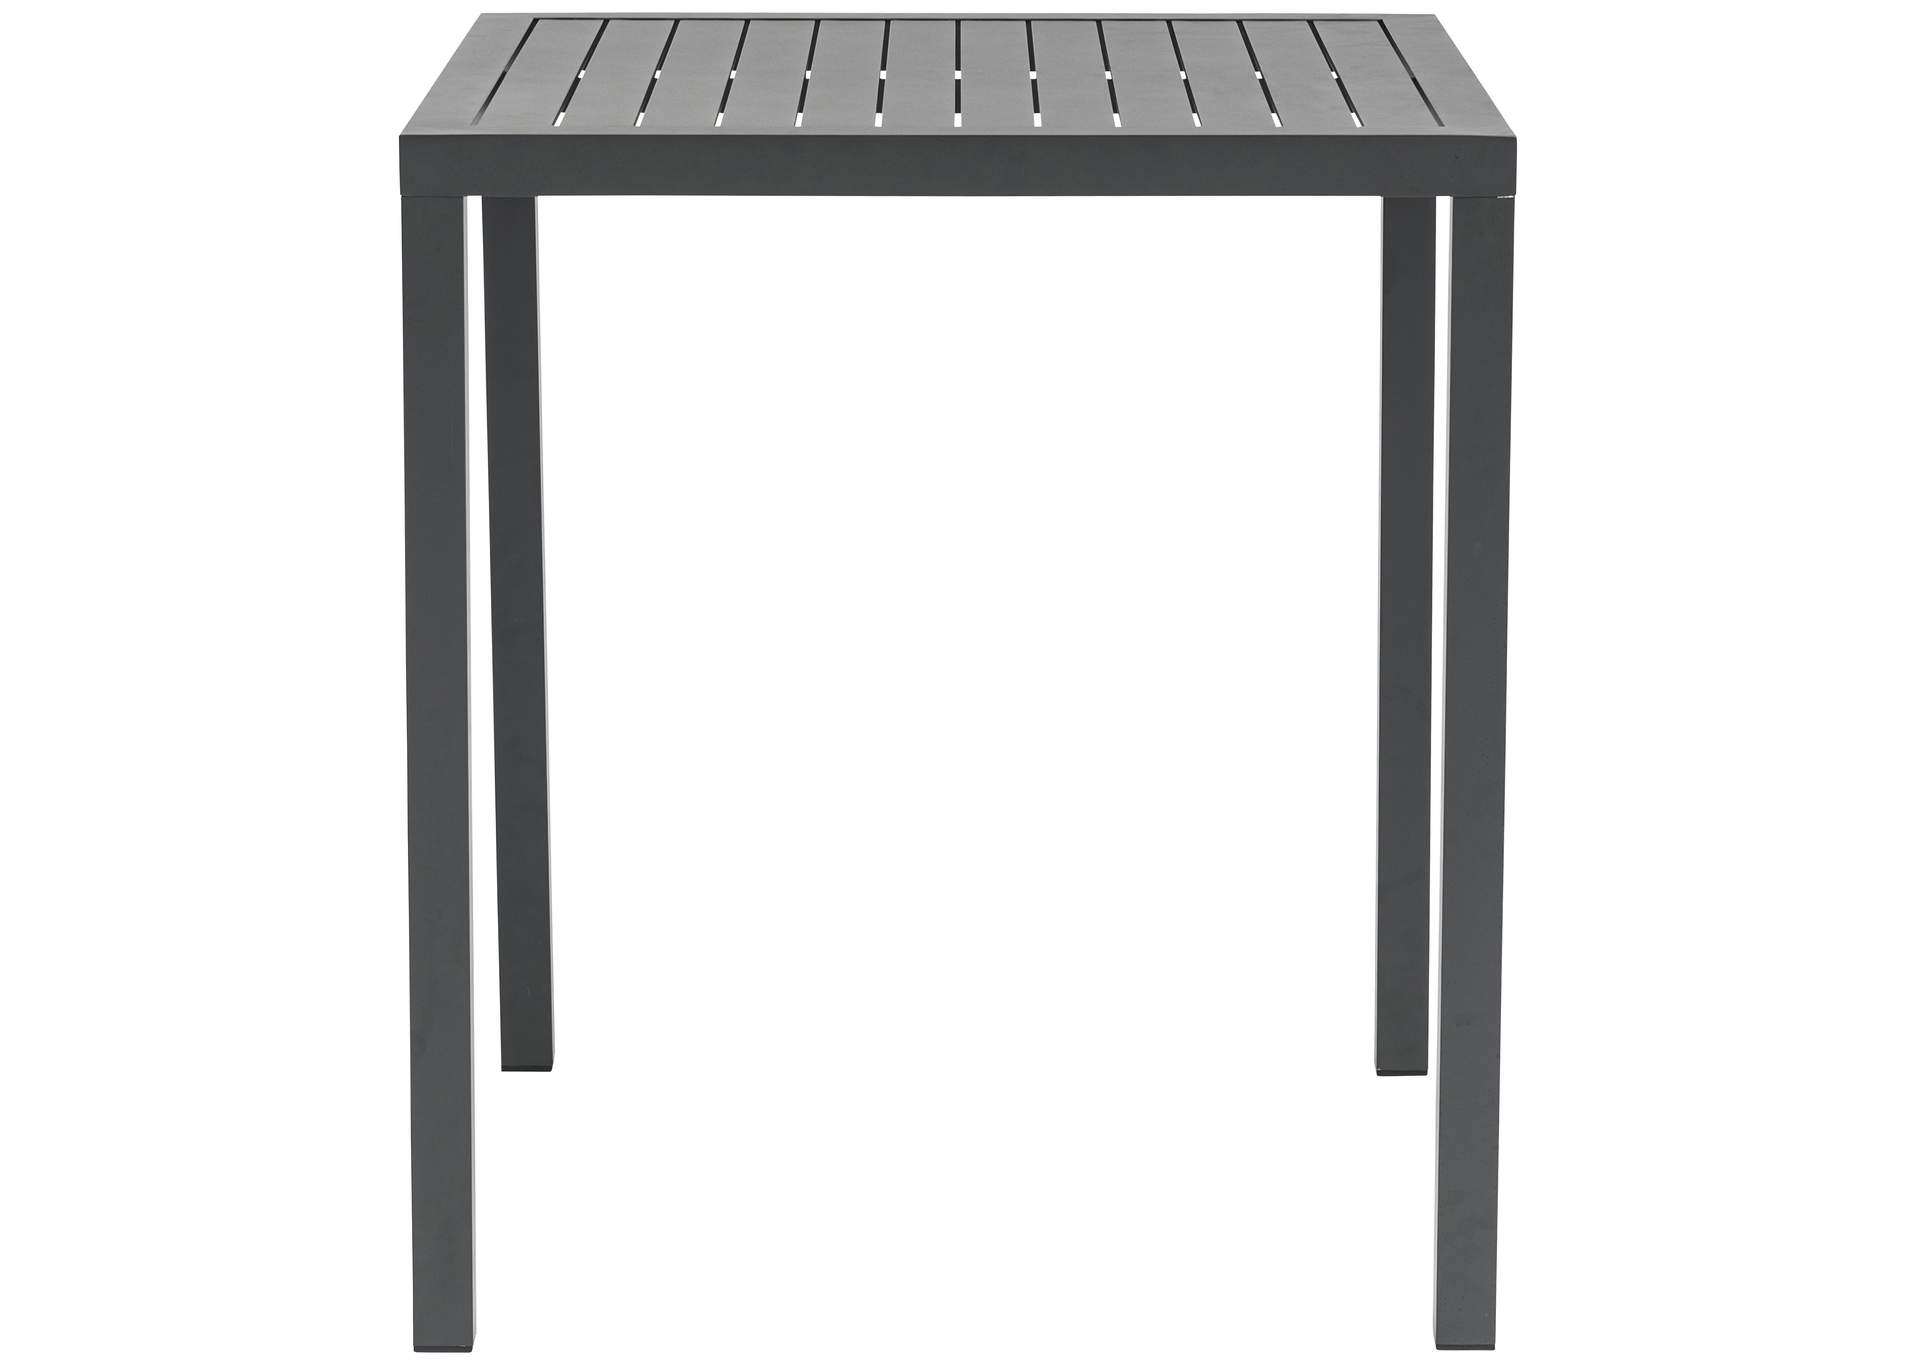 Maldives Outdoor Patio Square Bar Table,Meridian Furniture